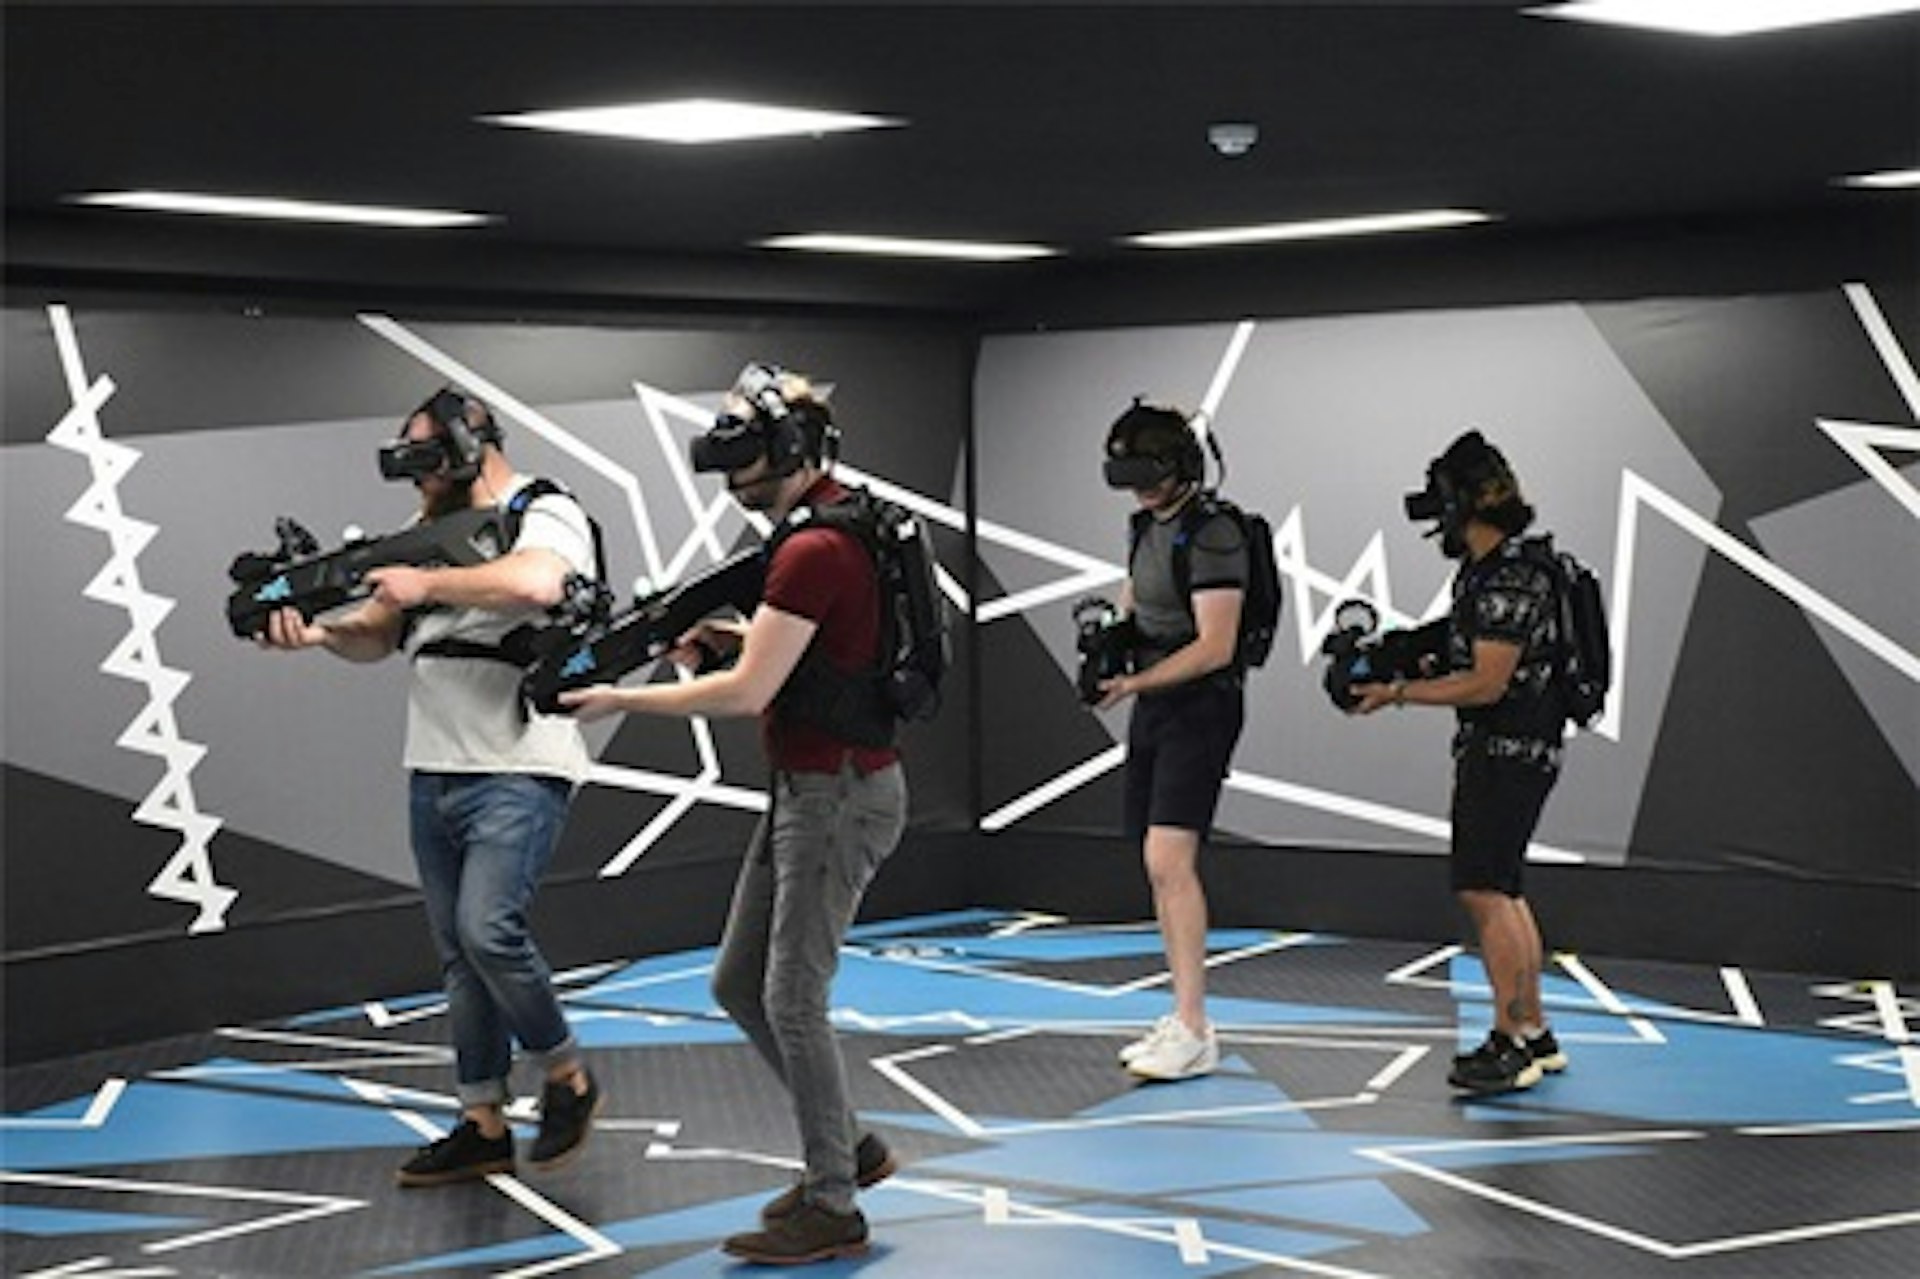 Ultimate Free Roam Virtual Reality Experience for Four at Zero Latency 3